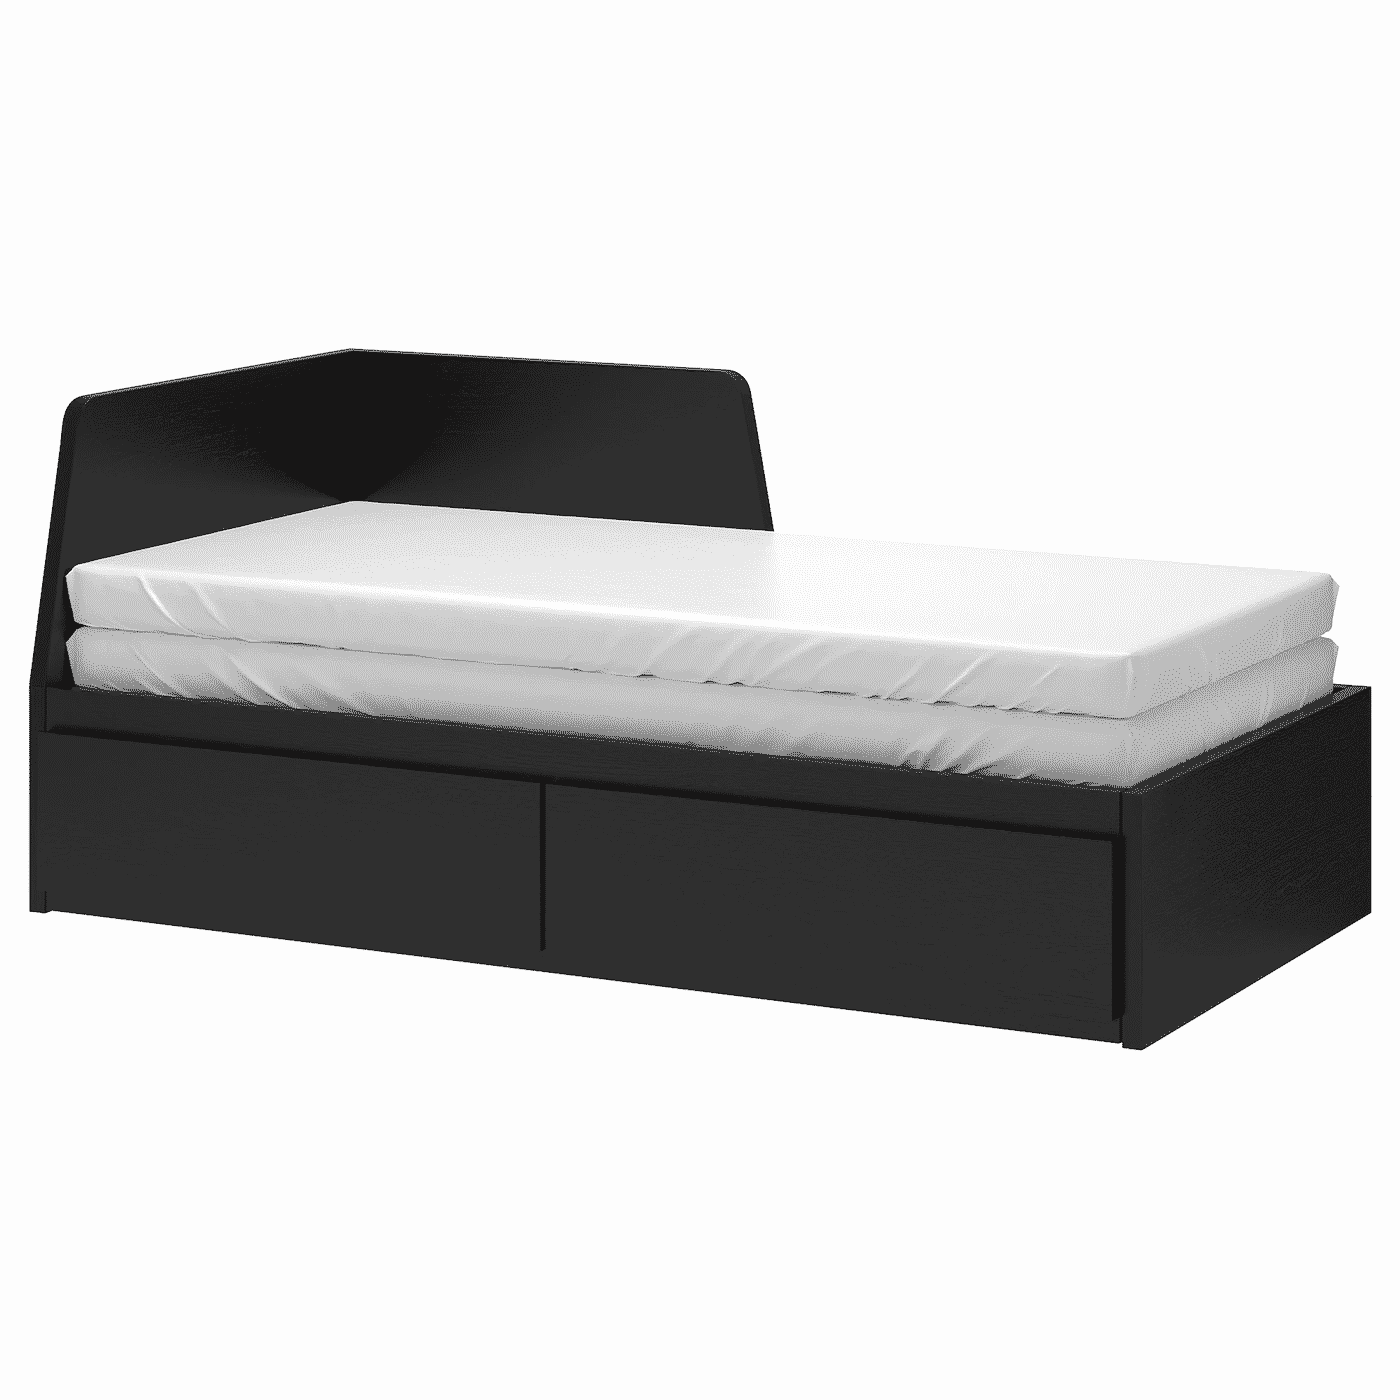 Best Ikea Twin Bed With Storage Review, Twin Trundle Bed With Storage Ikea